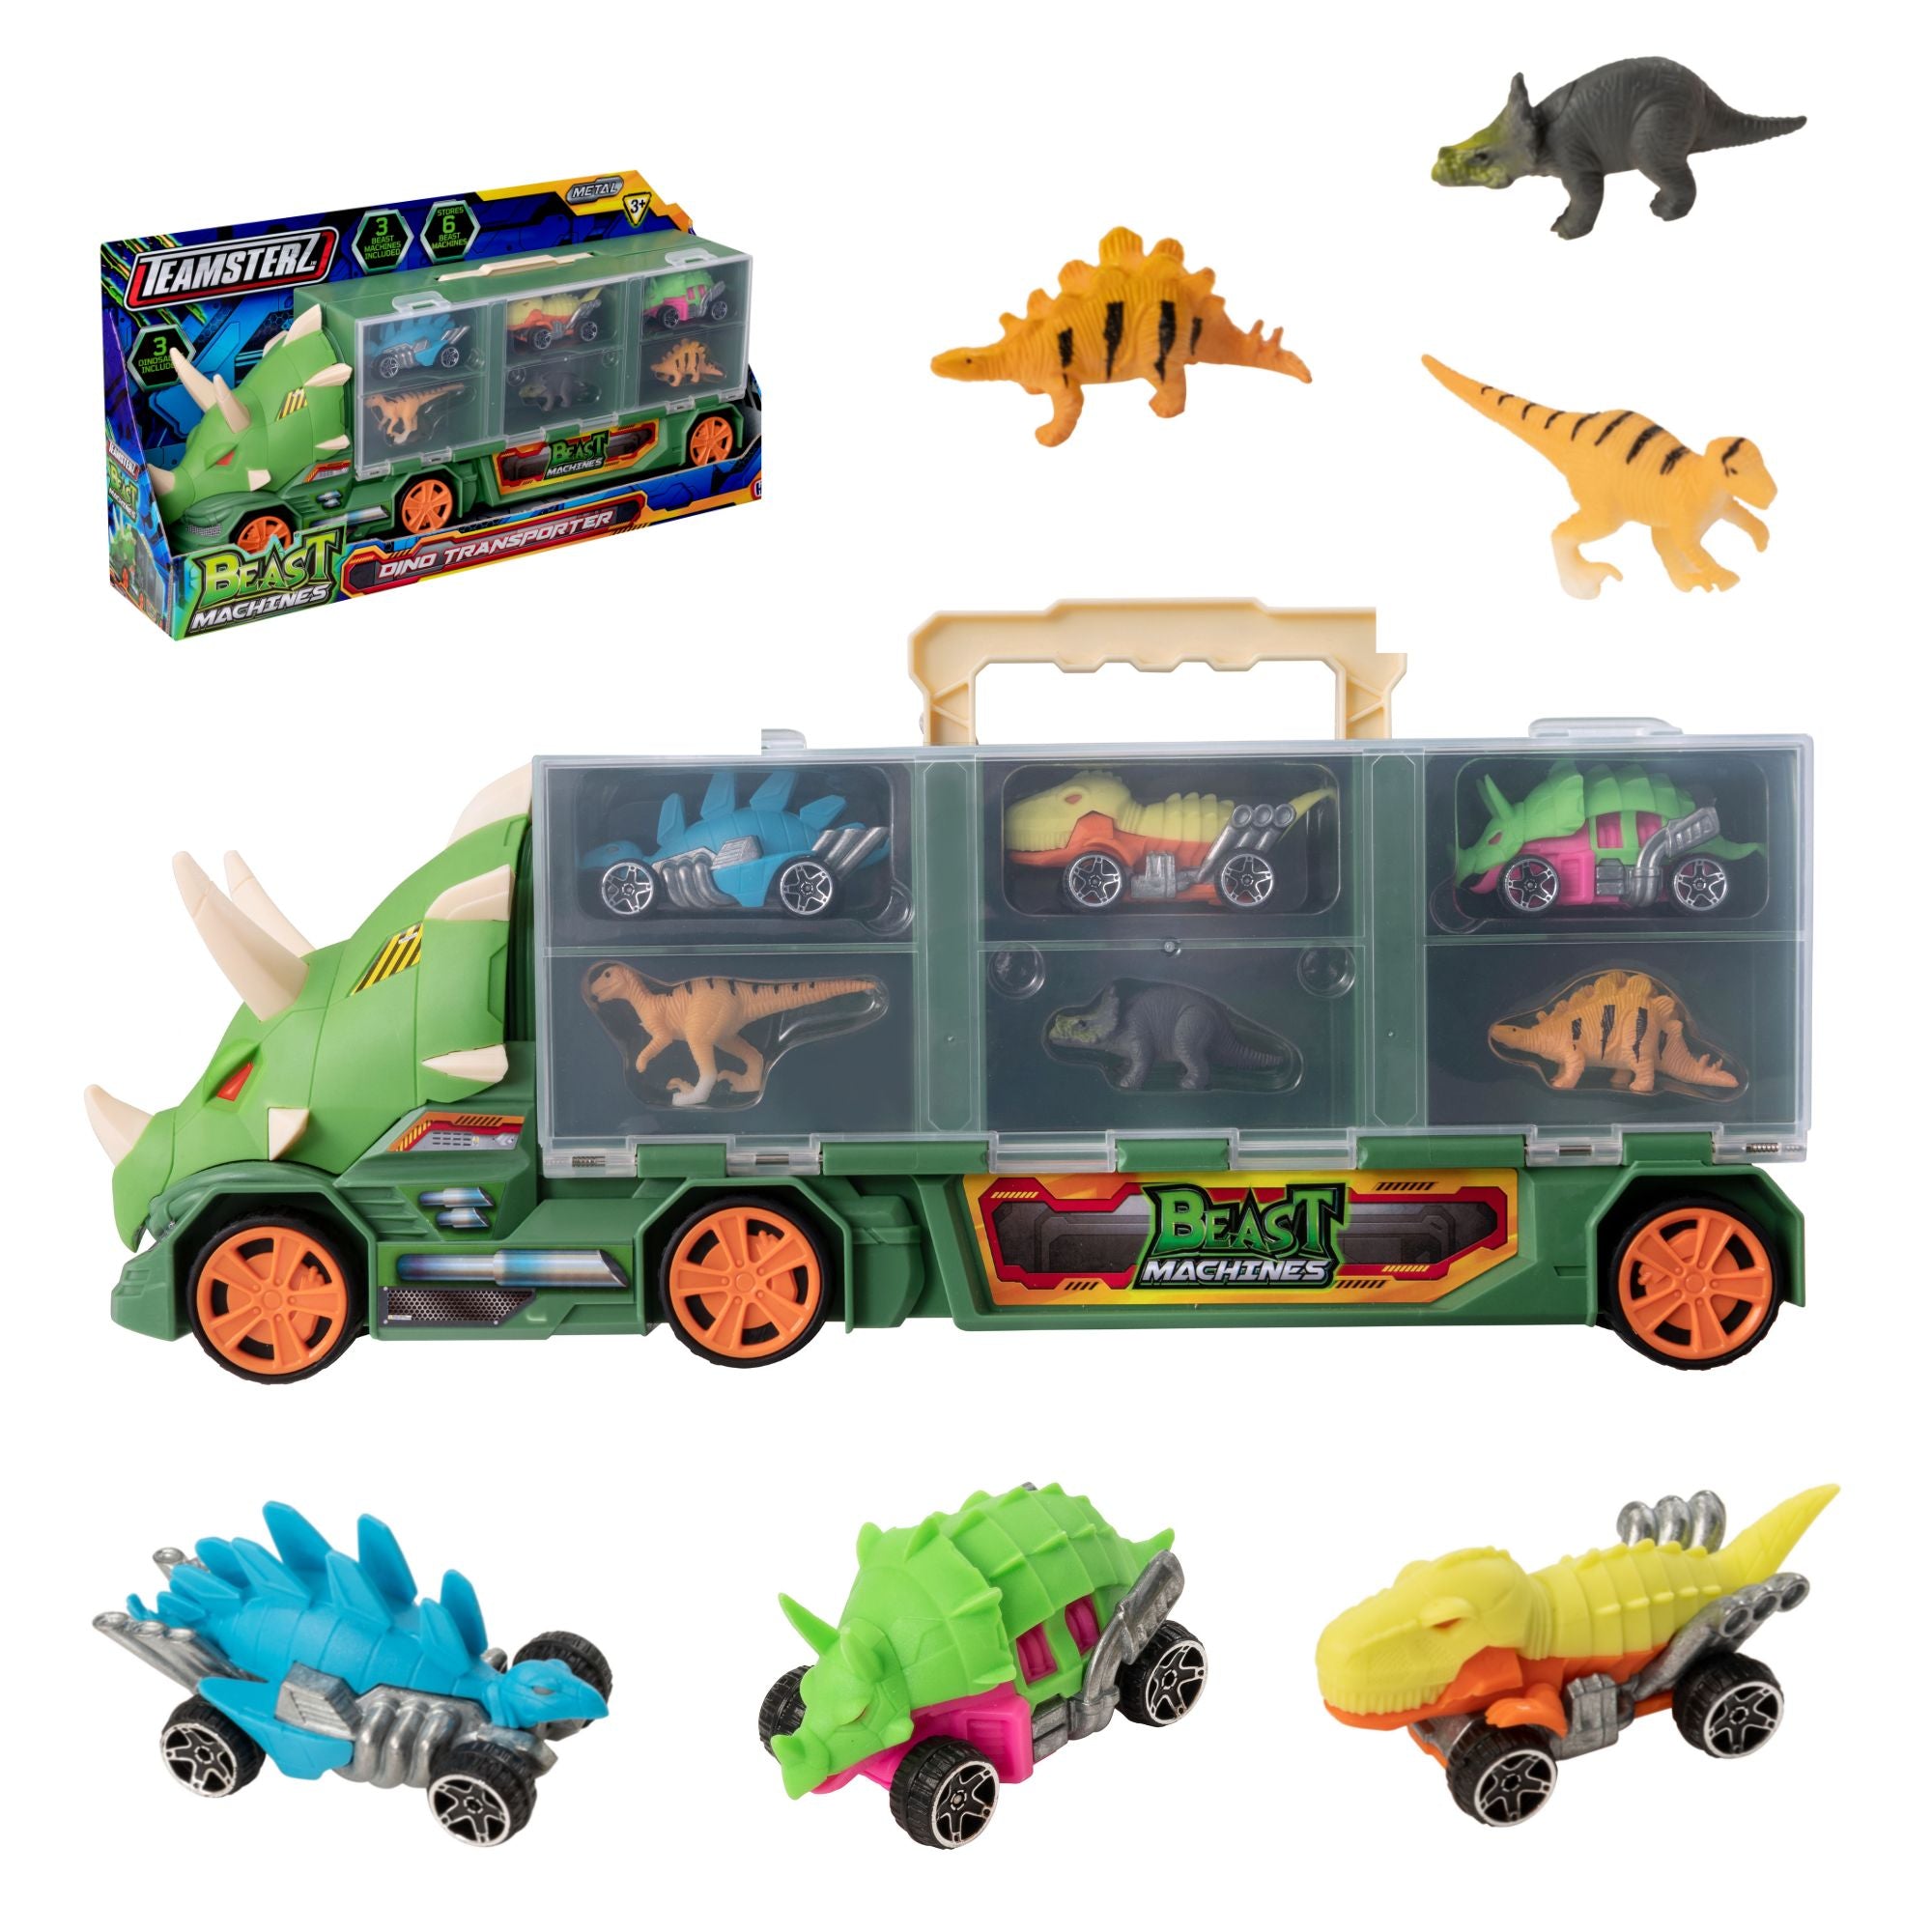 Teamsterz Beast Machines Triceratops Transporter | Includes 3 Dino Racer Cars & 3 Dinosaurs